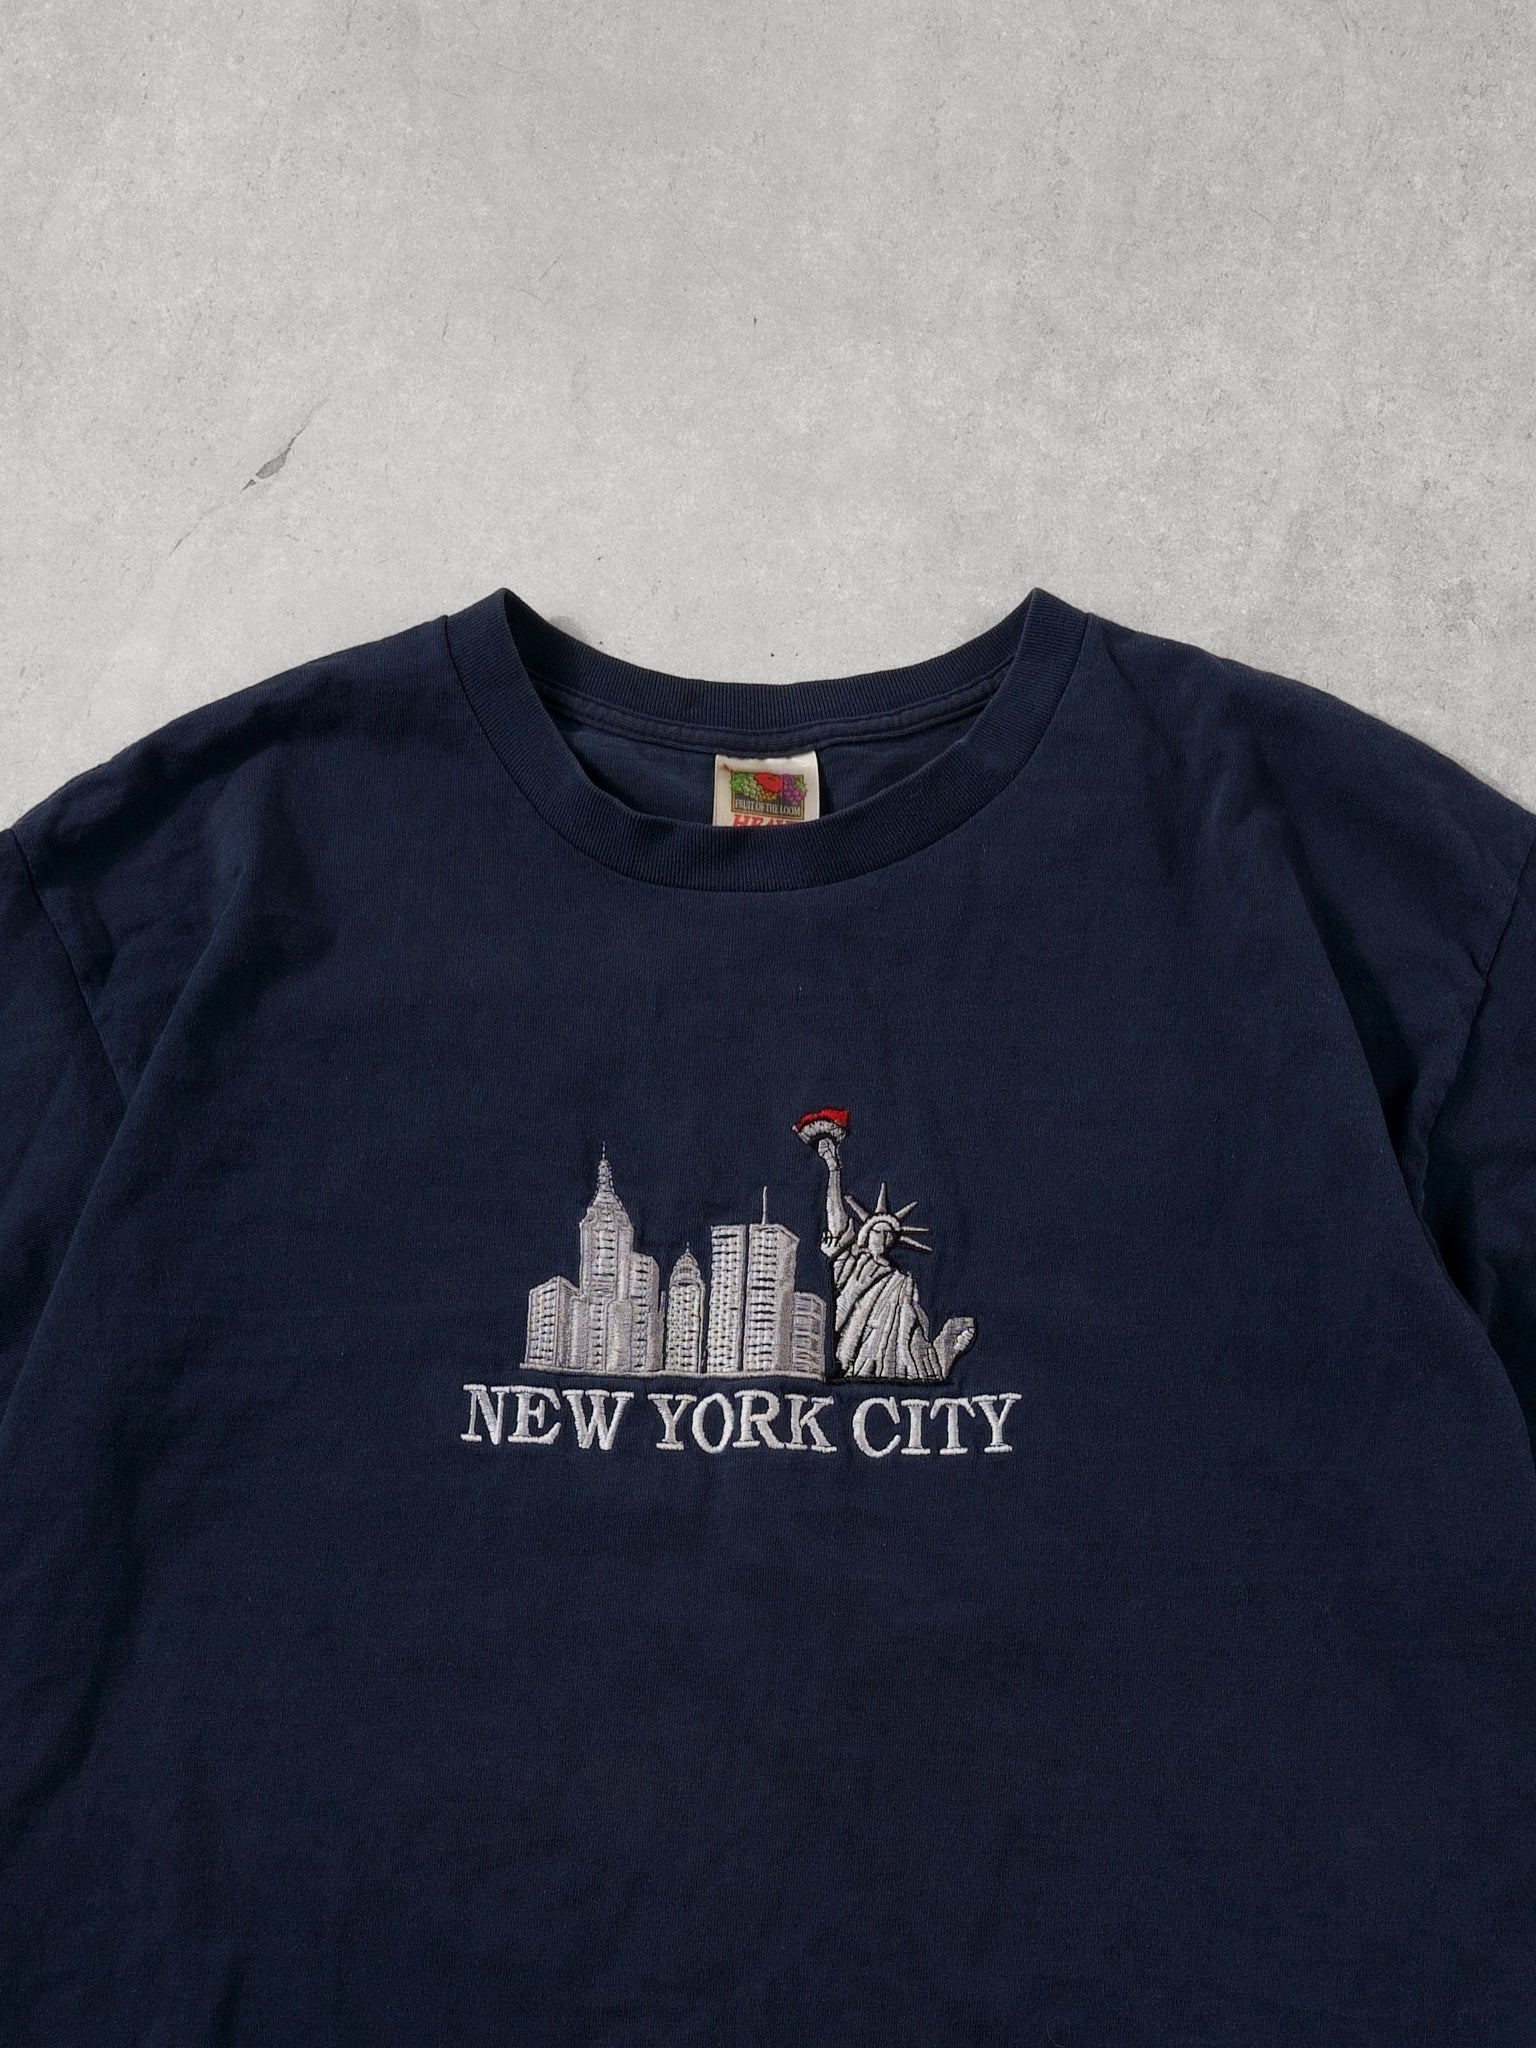 Vintage 90s Navy Blue New York City Embroidery Tee (L)